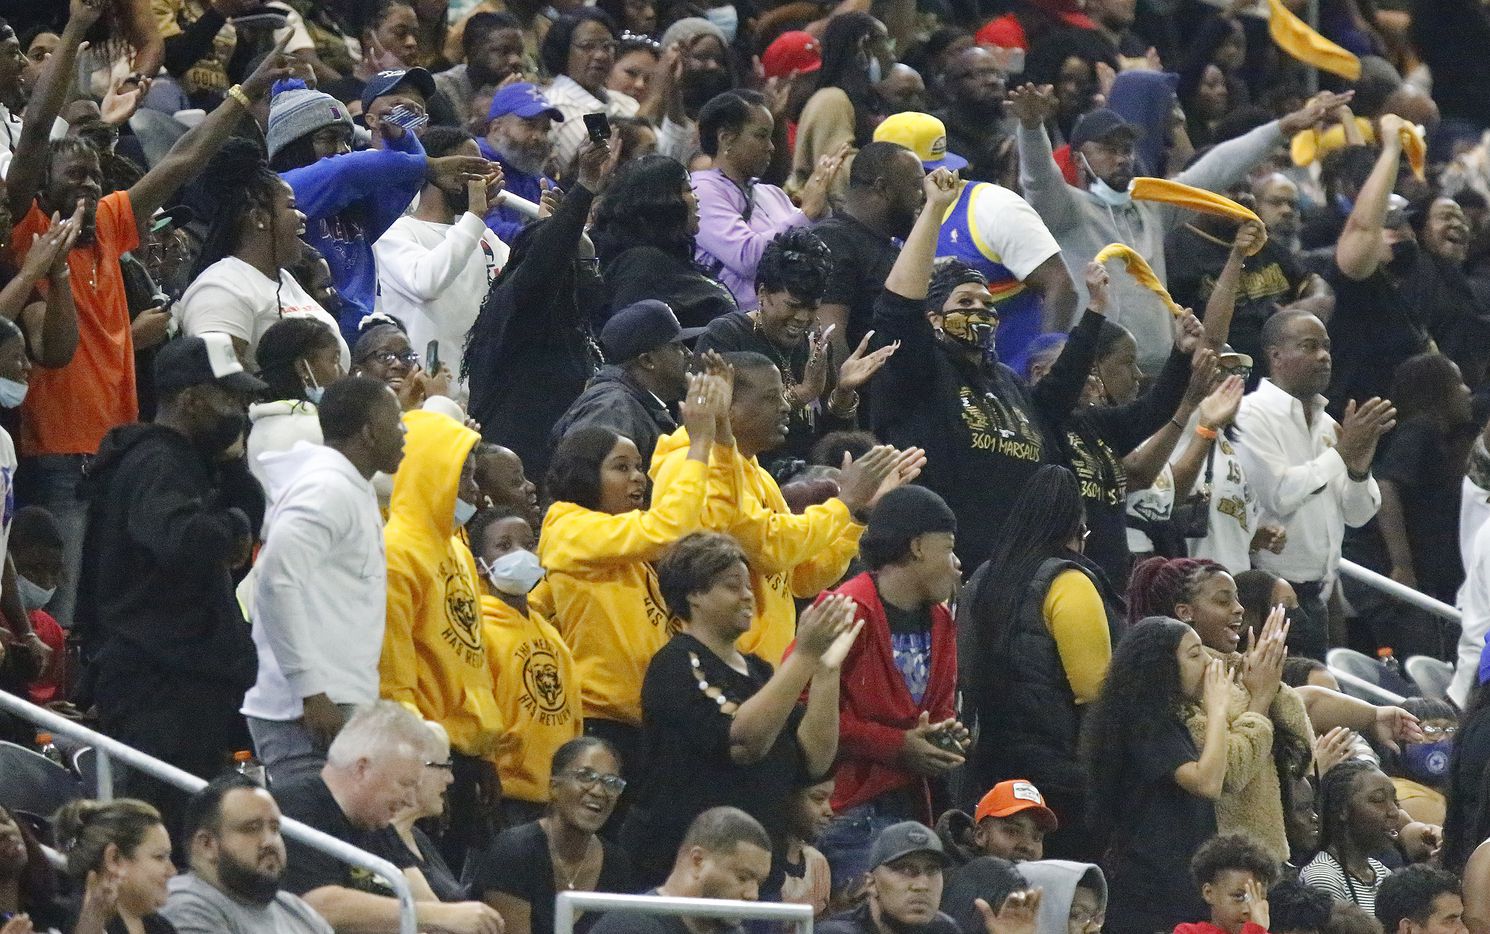 South Oak Cliff High School fans cheer their team during the first half as South Oak Cliff High School played Lovejoy High School in the Class 5A Divison II Region II final playoff game at Ford Center in Frisco on Saturday, December 4, 2021. (Stewart F. House/Special Contributor)